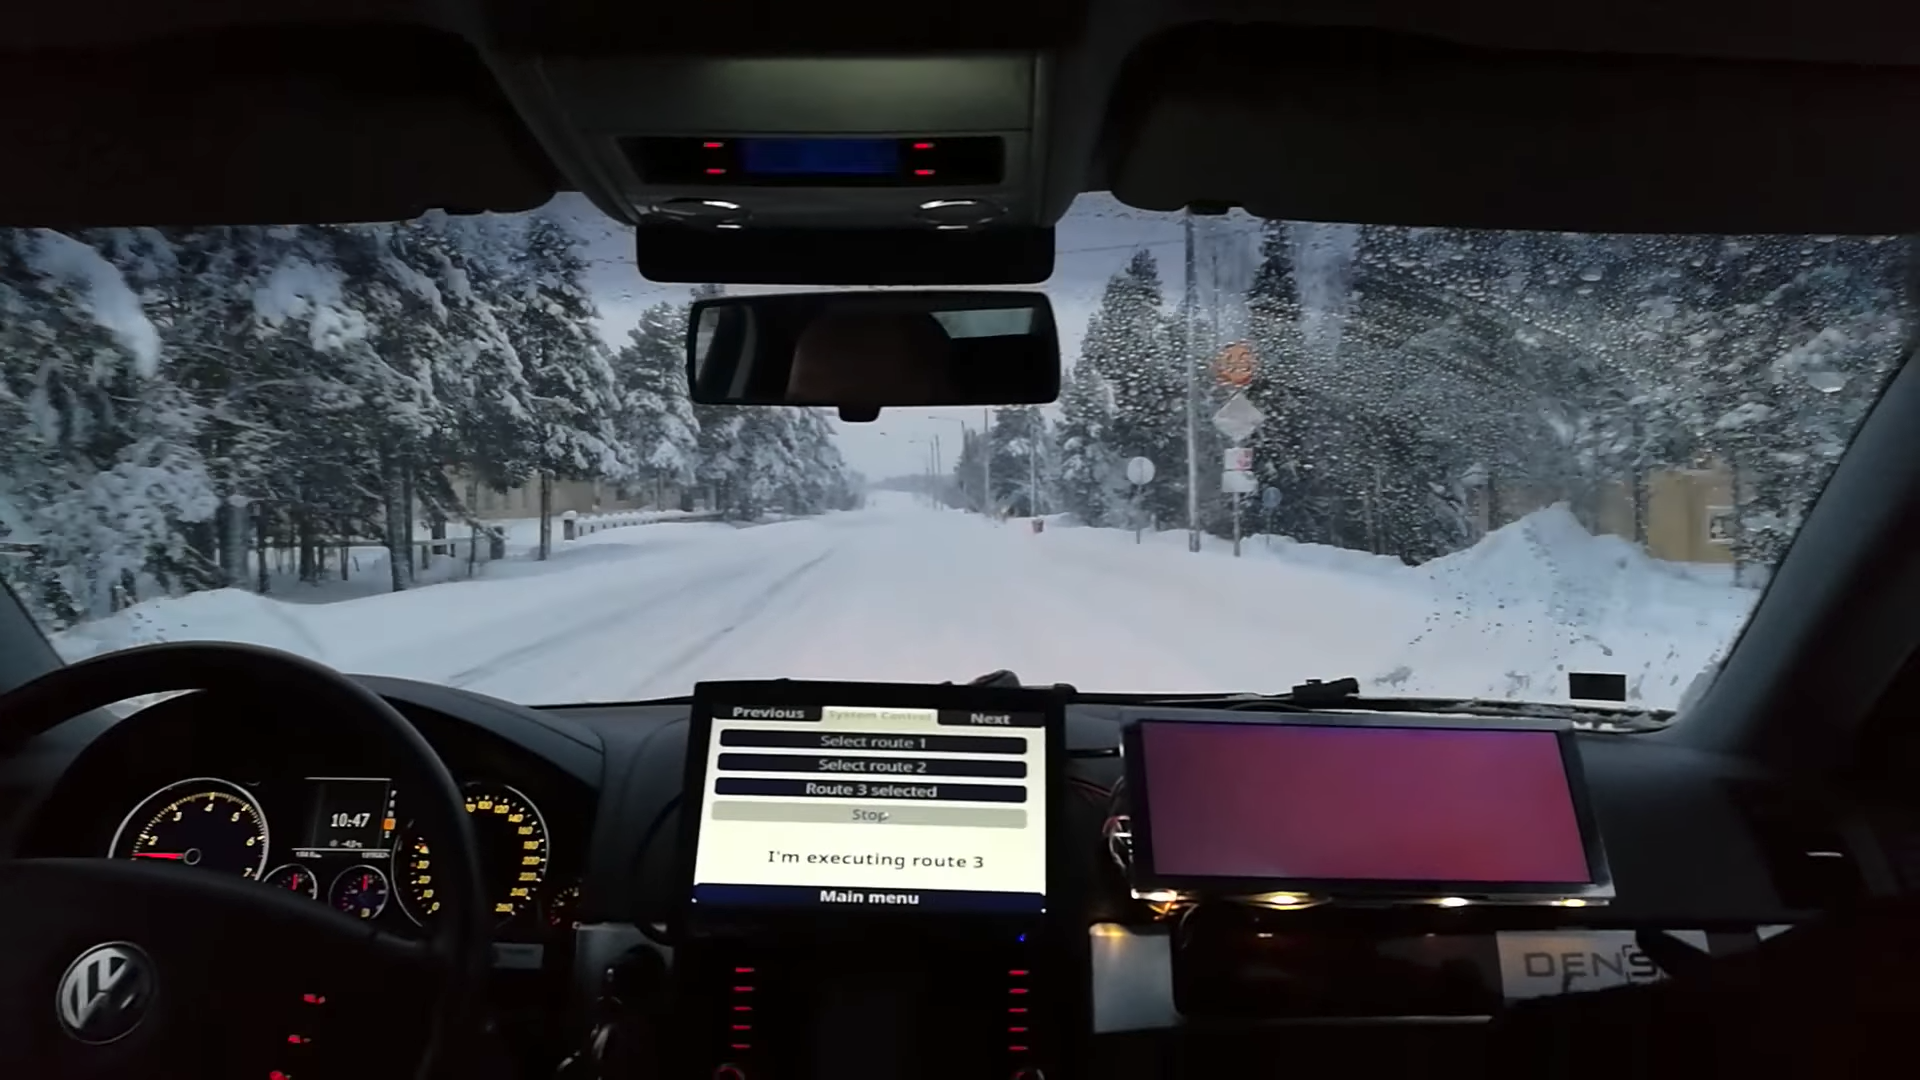 Worldfirst demonstration of an autonomous car at 40mph in heavy snow